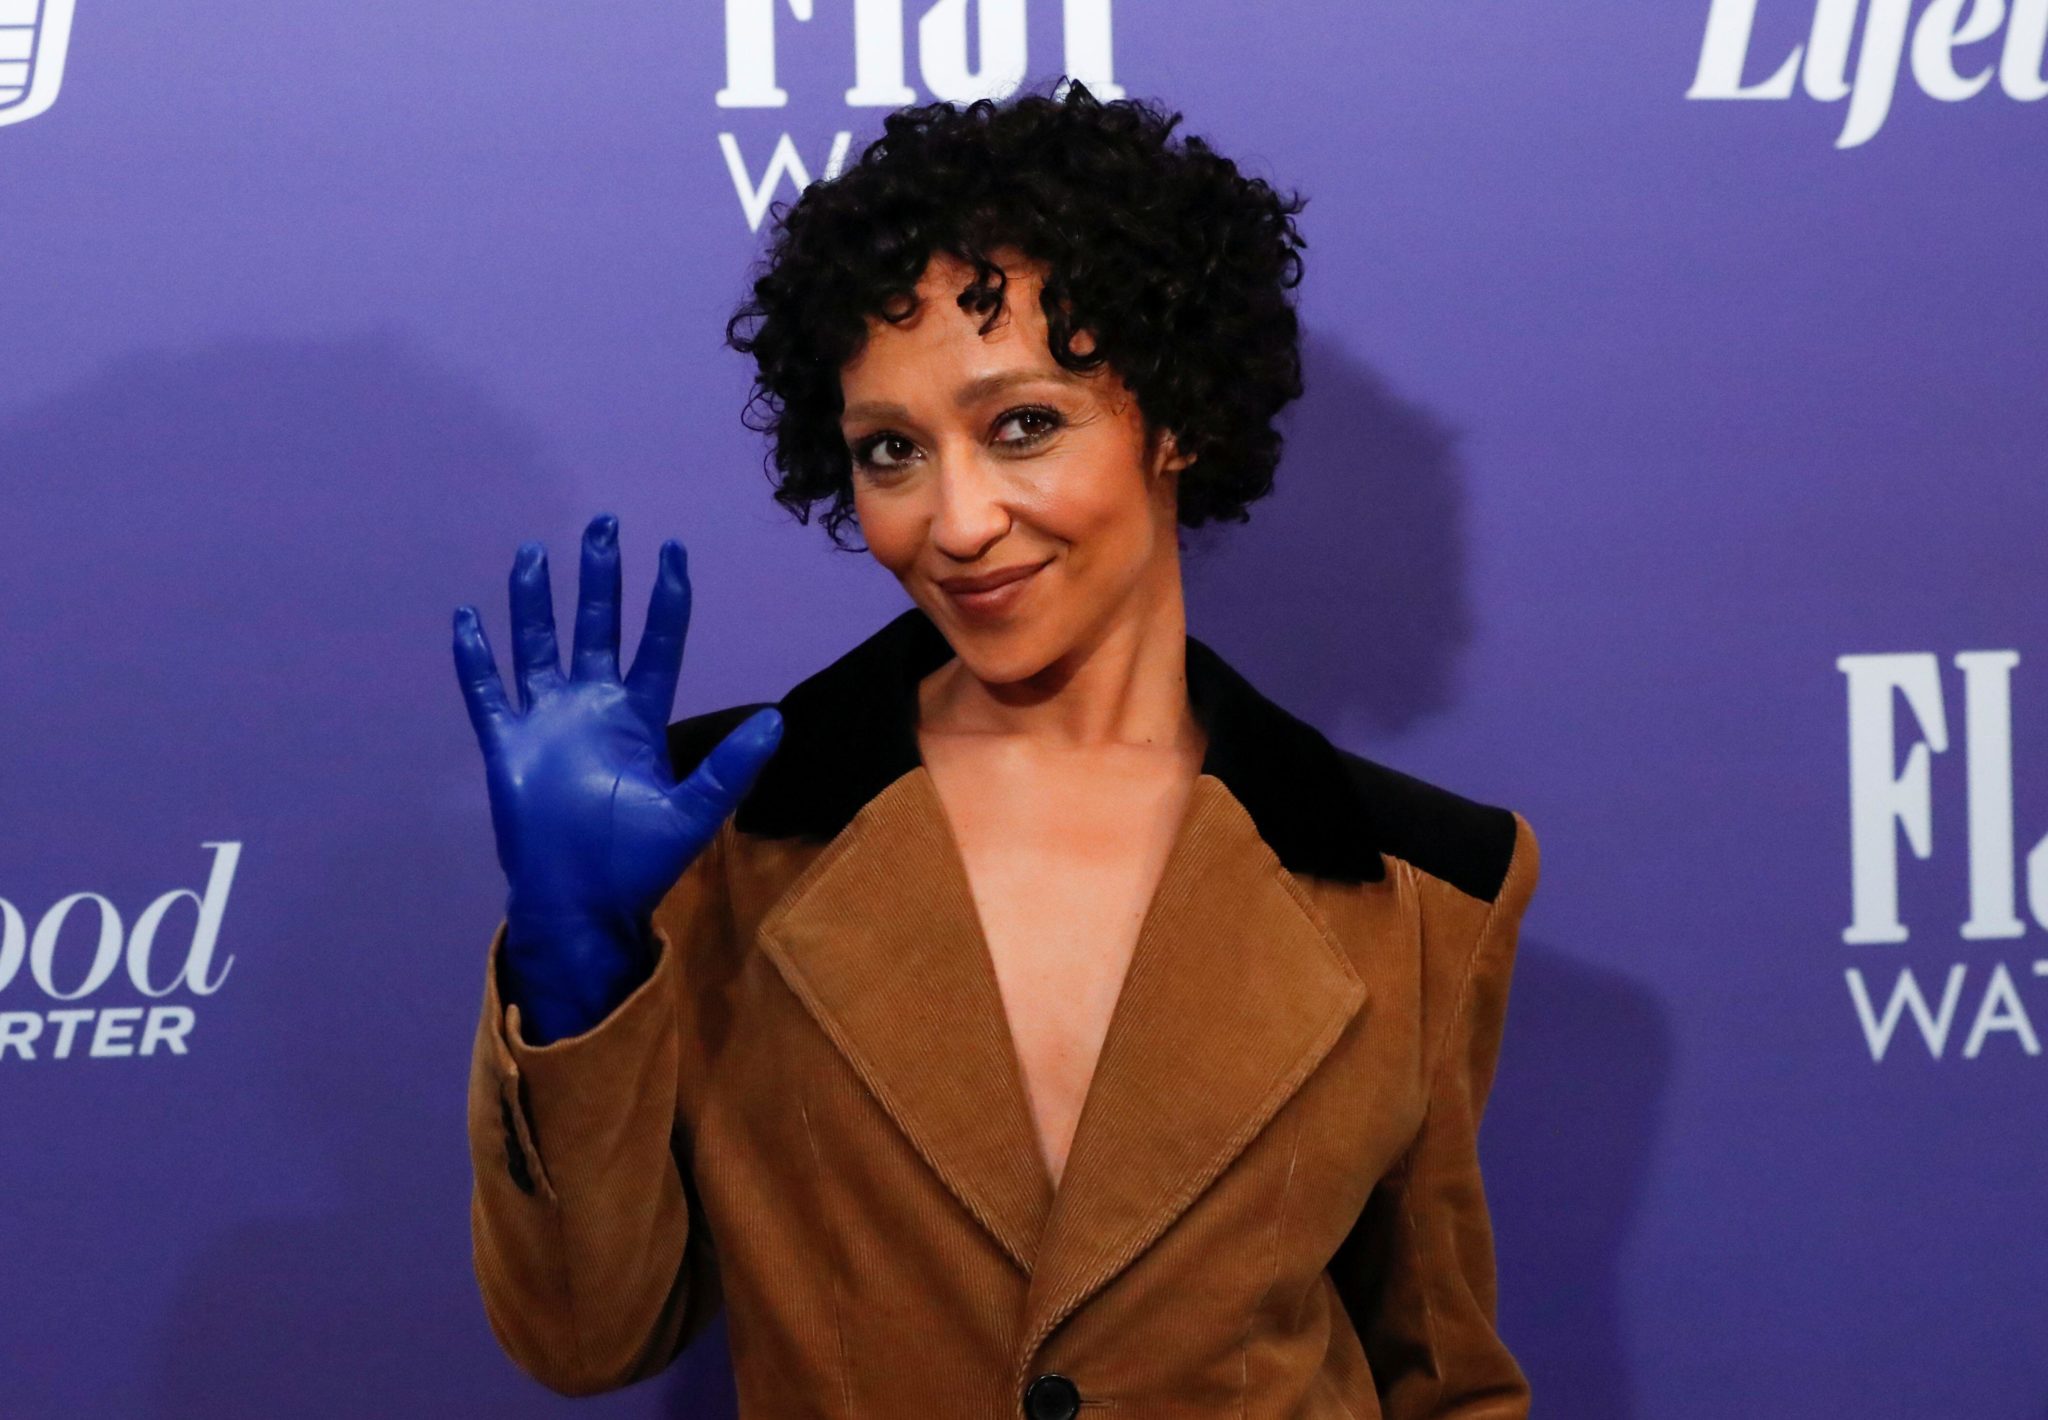 Ruth Negga attends The Hollywood Reporter's Women in Entertainment gala in Los Angeles, California, 08-12-2021. Image: REUTERS/Mario Anzuoni